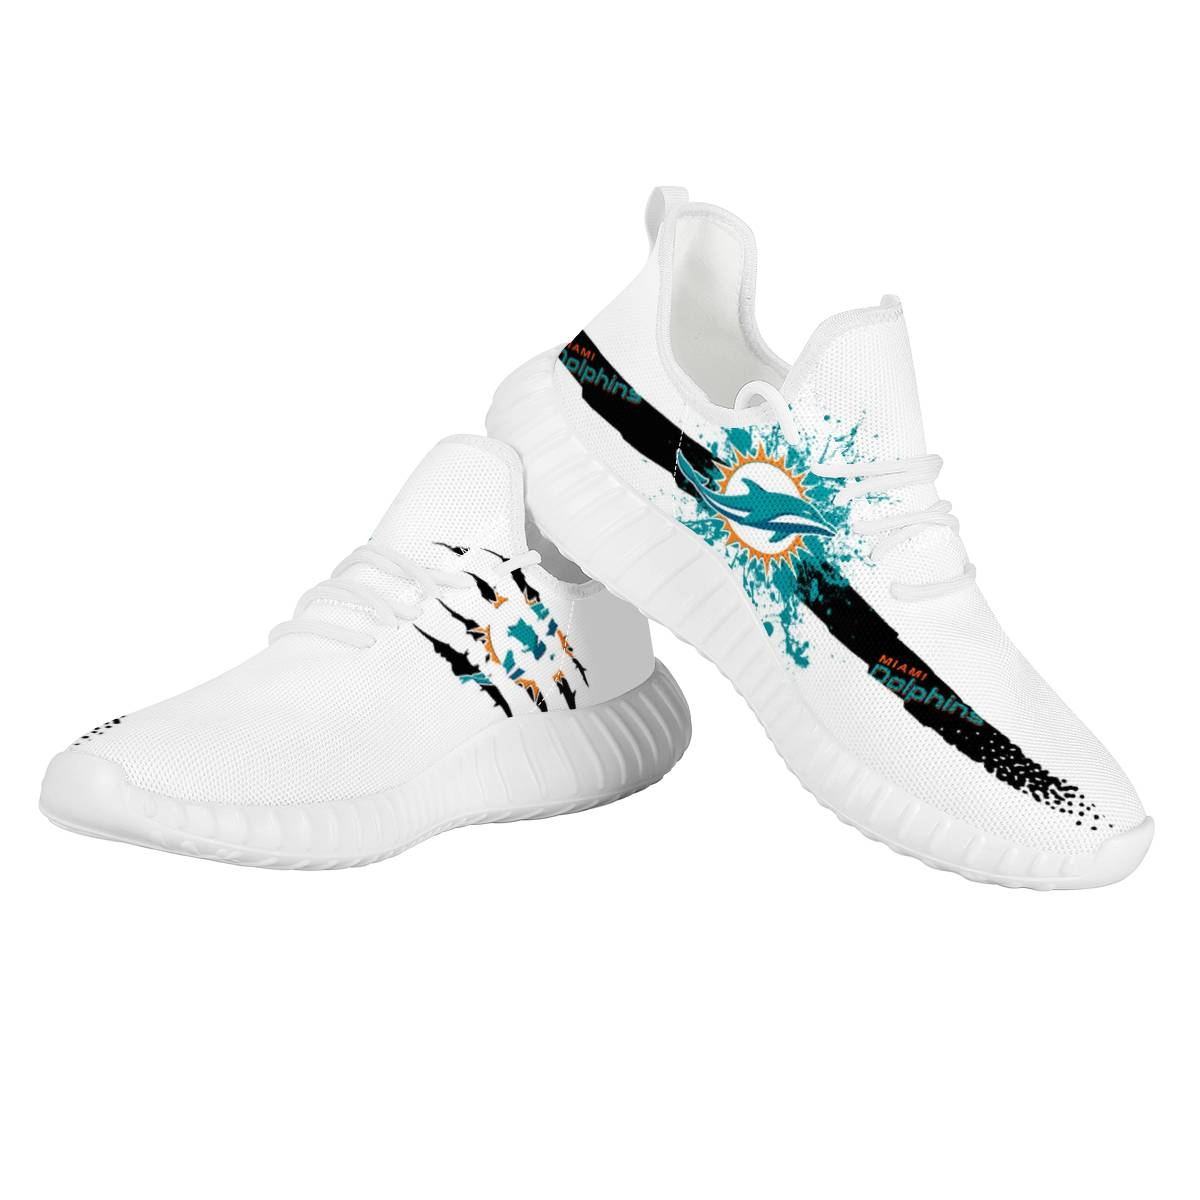 Men's Miami Dolphins Mesh Knit Sneakers/Shoes 010